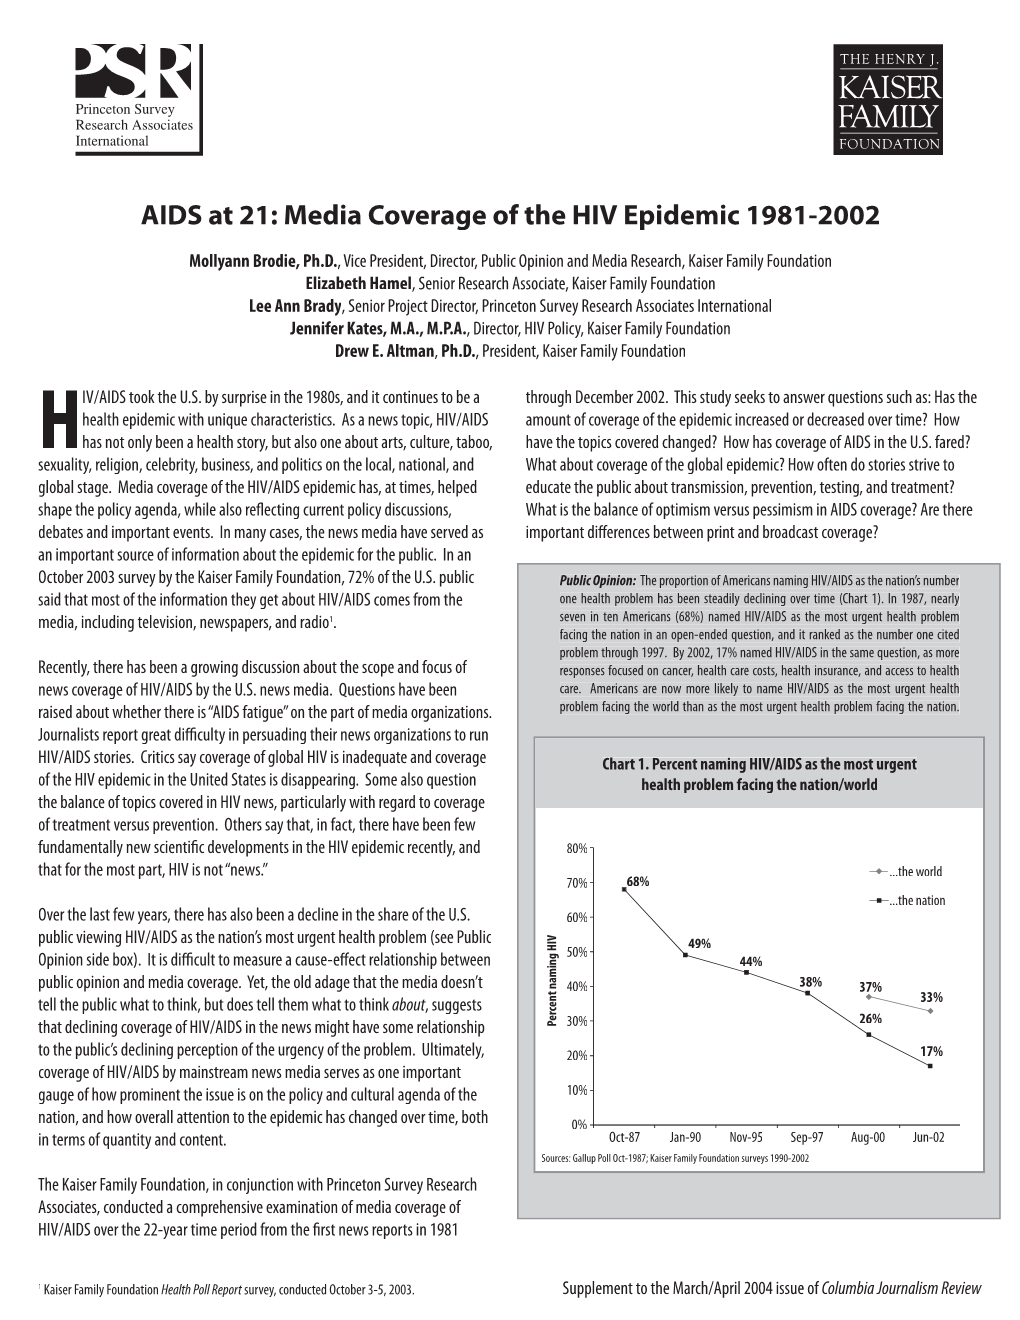 AIDS at 21: Media Coverage of the HIV Epidemic 1981-2002